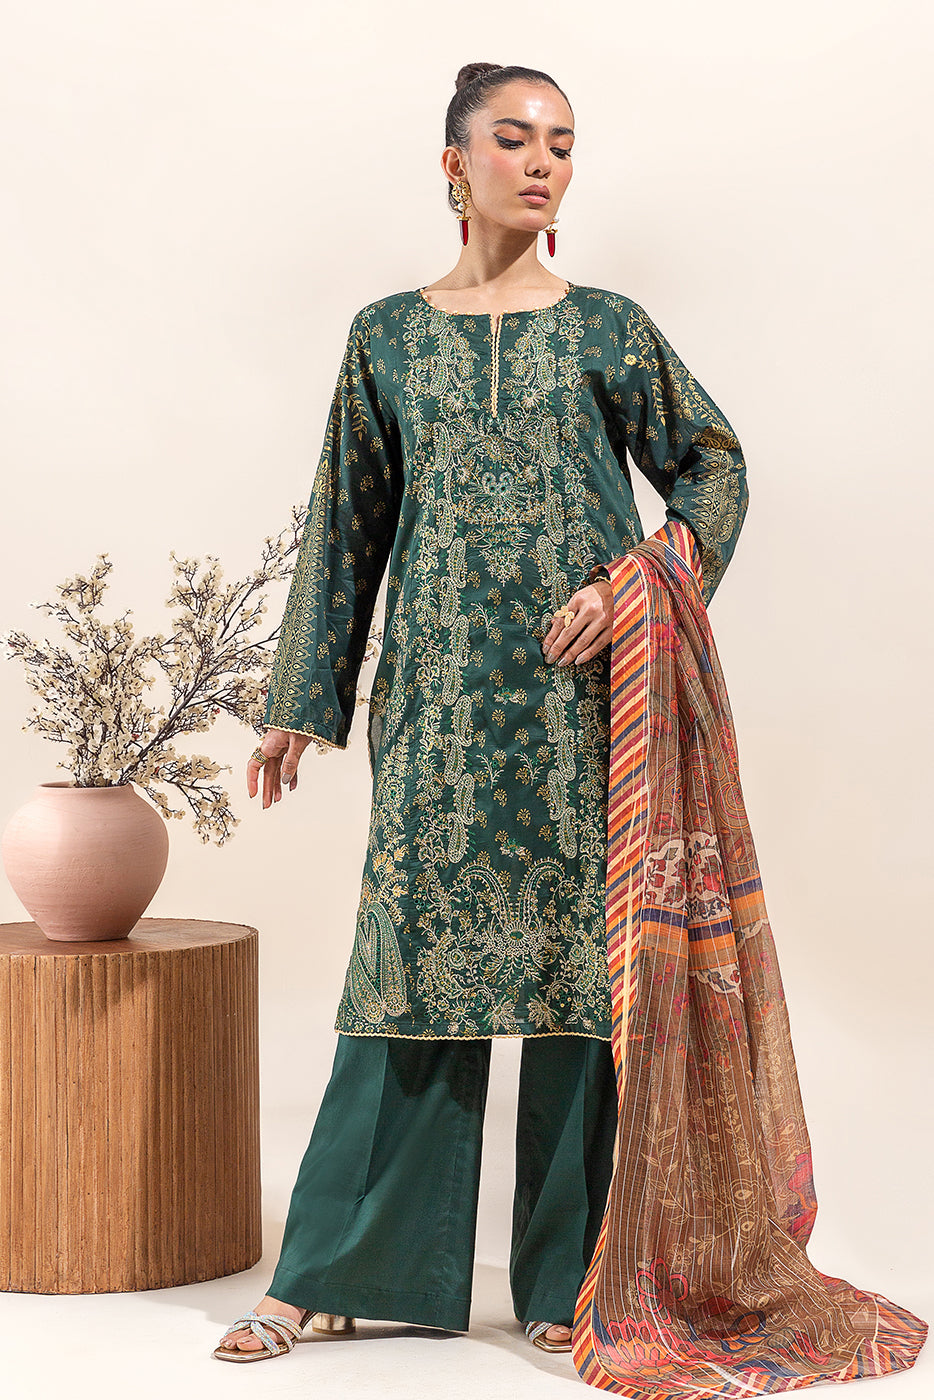 3 PIECE EMBROIDERED LAWN SUIT-EMERALD SPRUCE(UNSTITCHED)